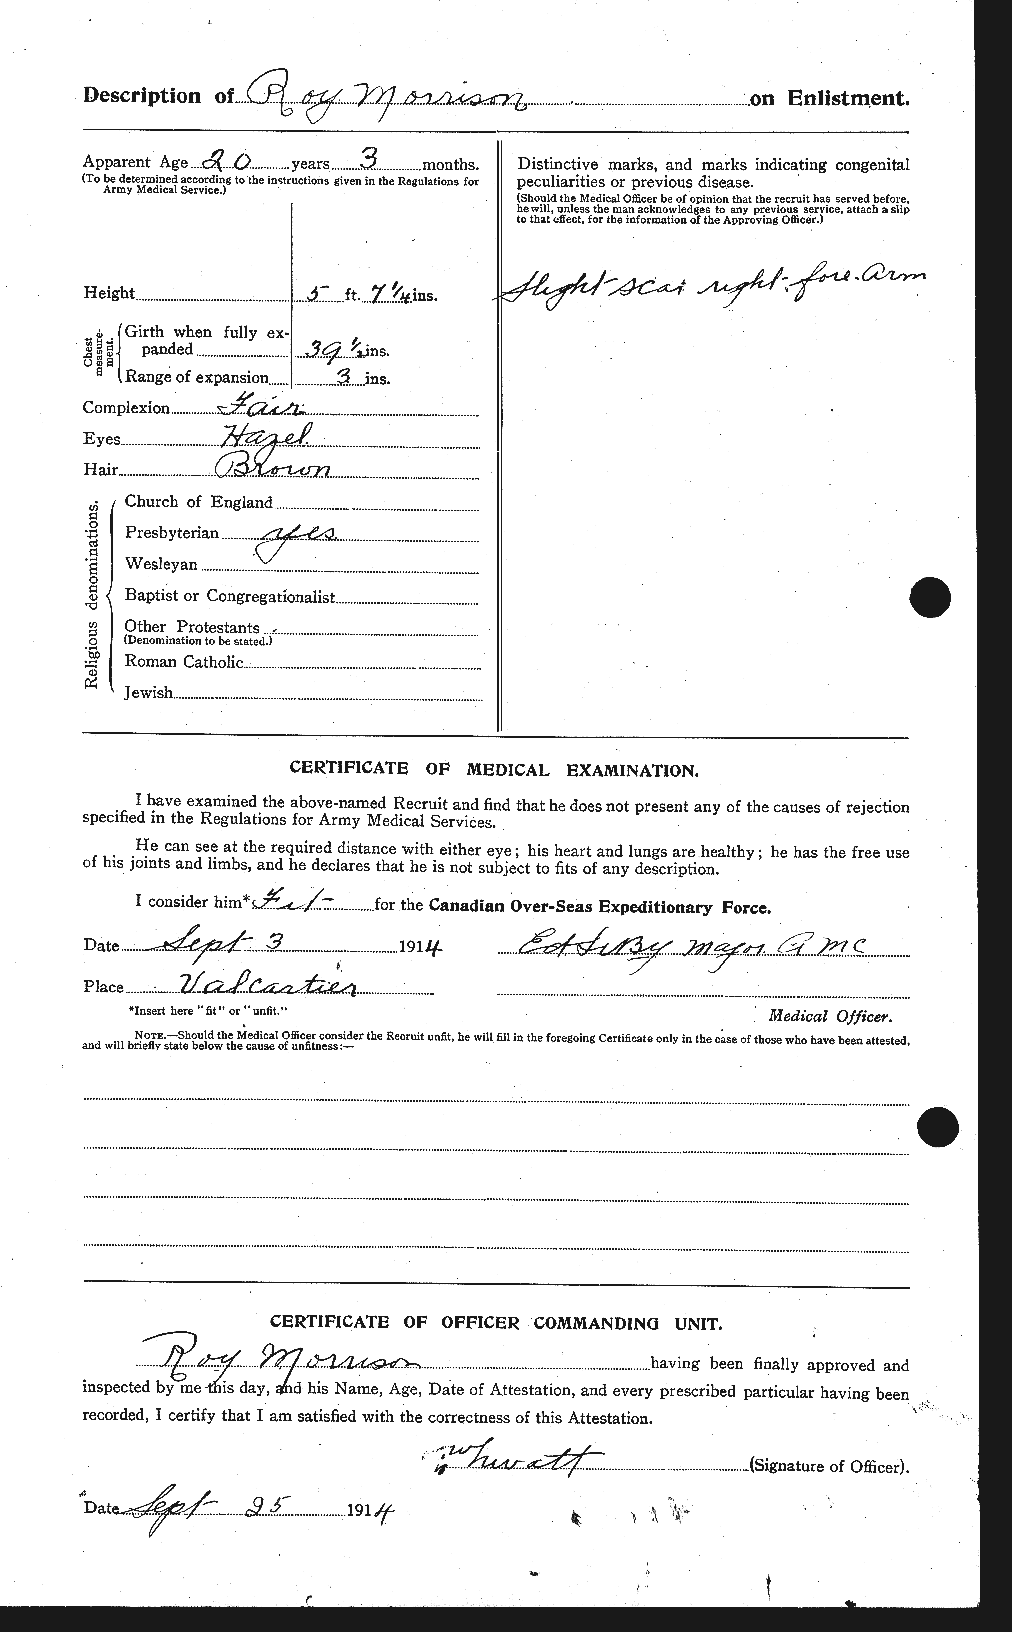 Personnel Records of the First World War - CEF 509131b